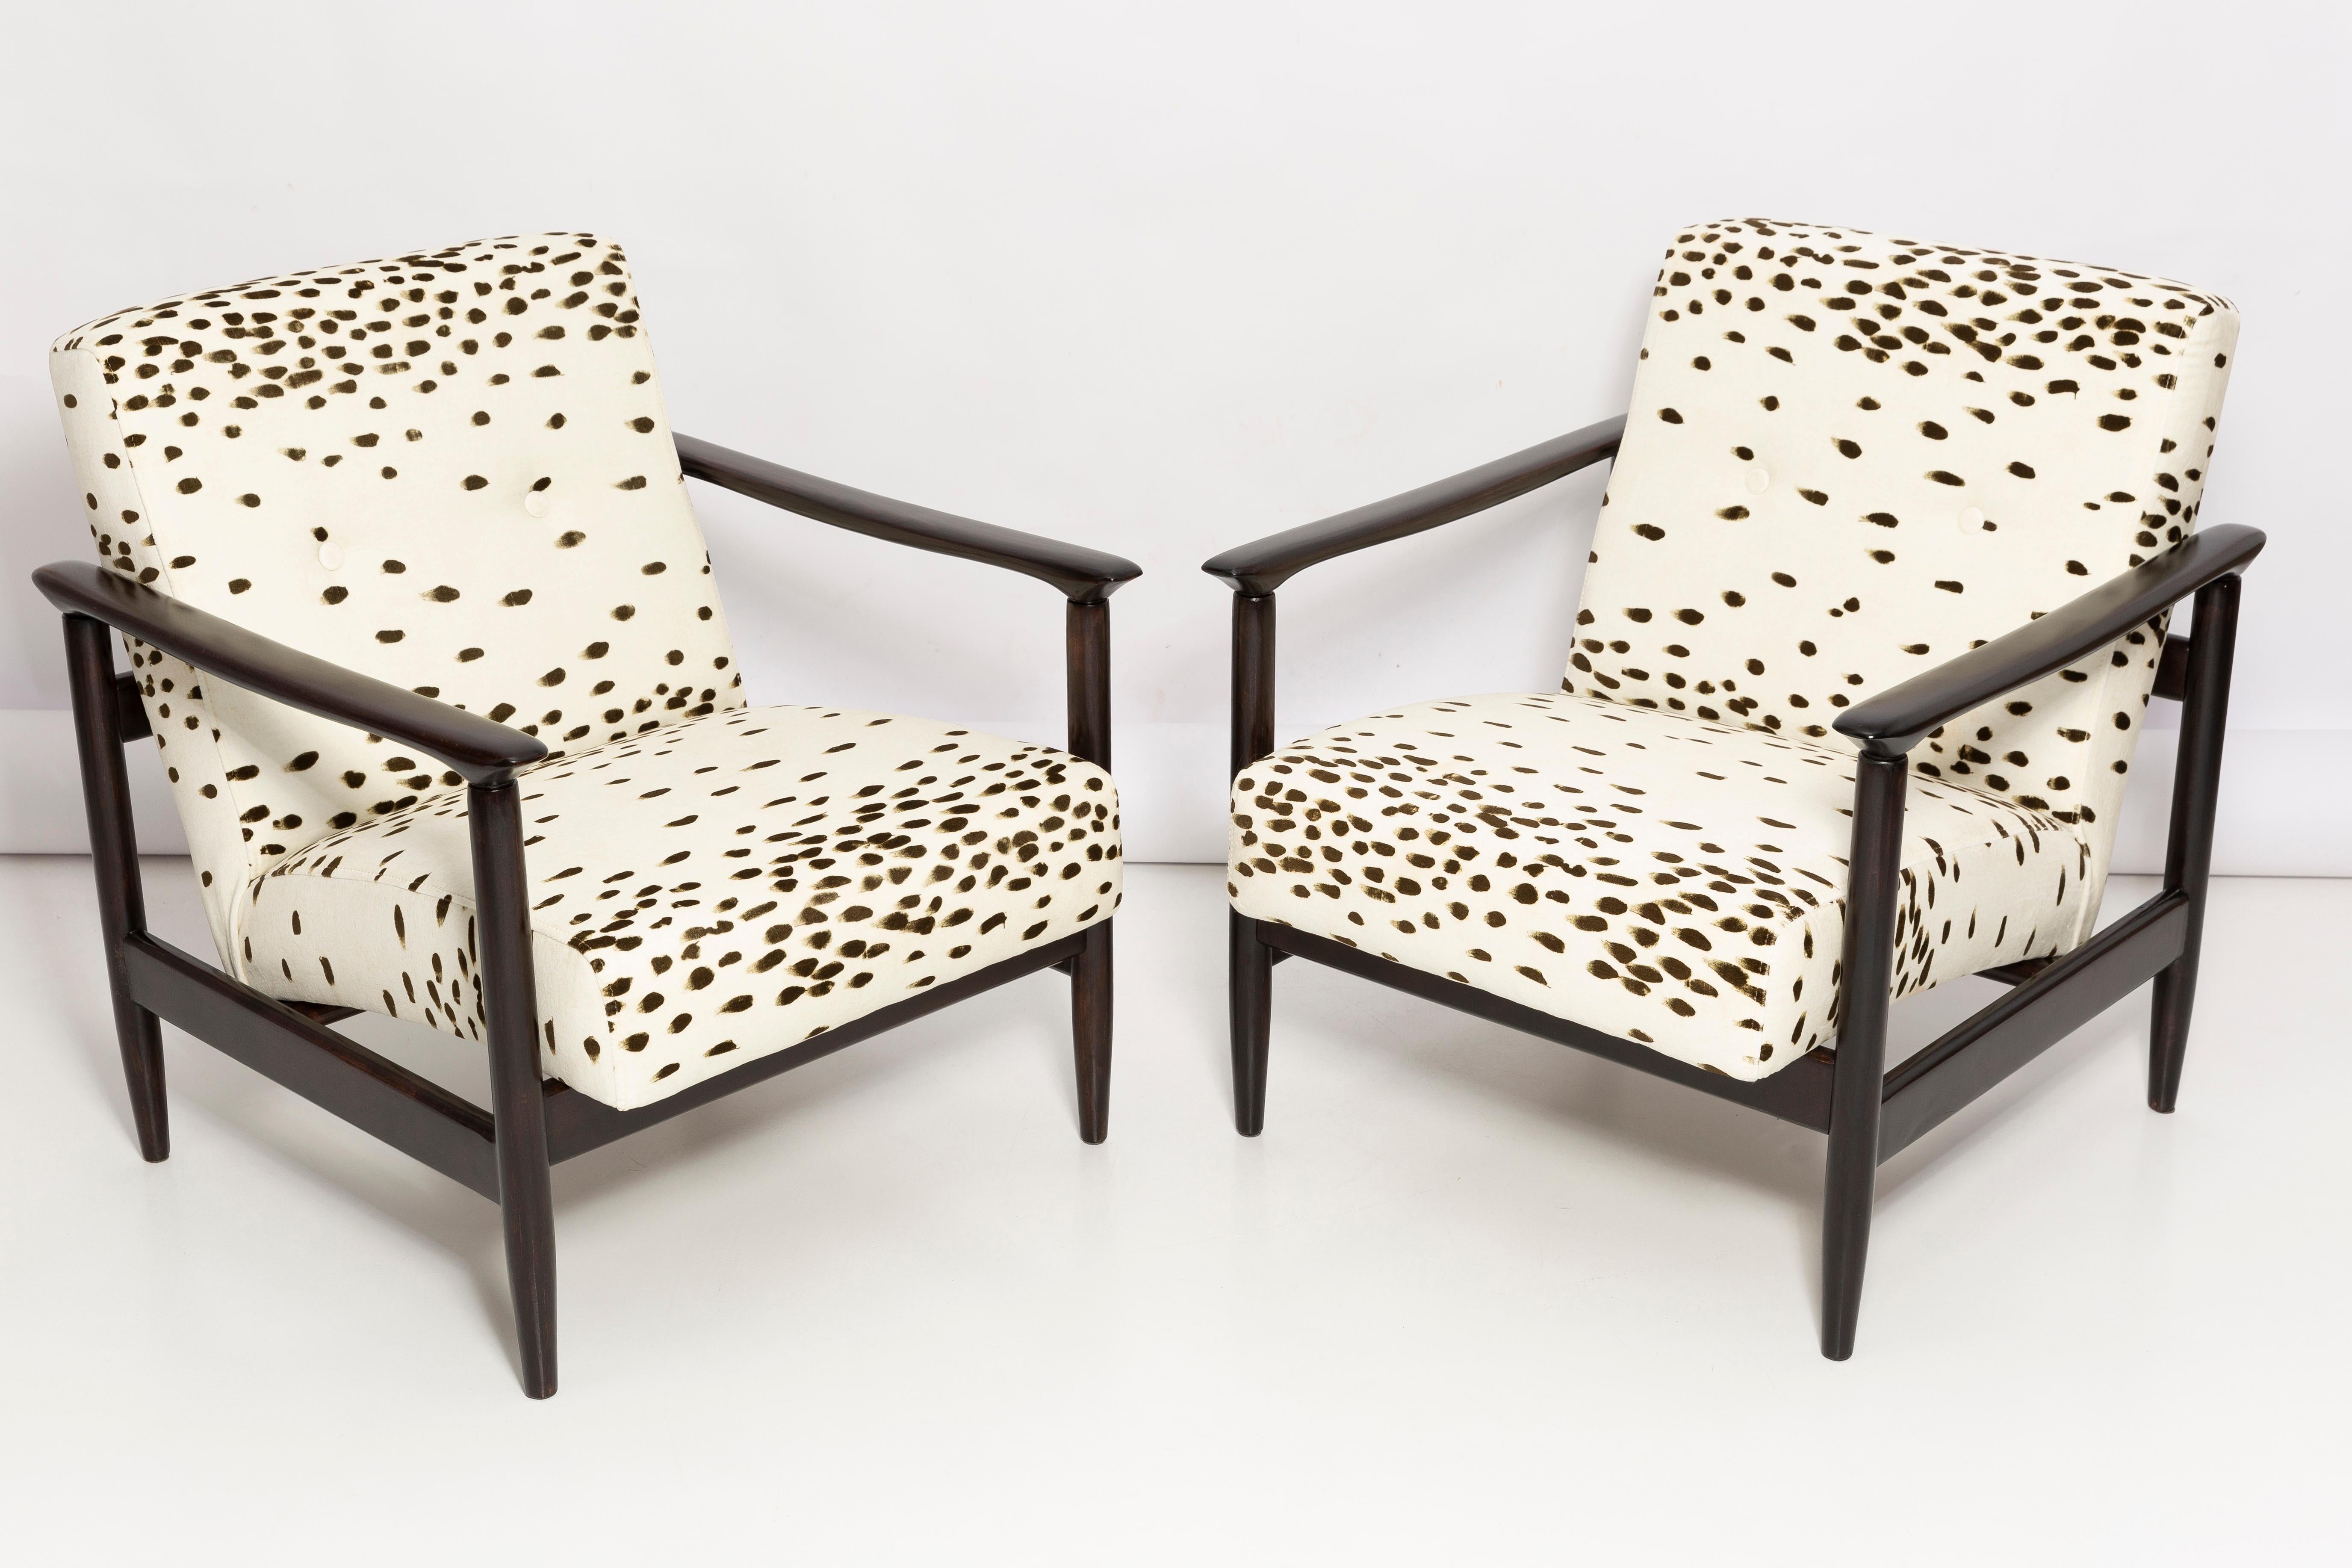 Polish Set of Two Mid Century Dalmatian Velvet Armchairs, by Edmund Homa, Europe, 1960s For Sale